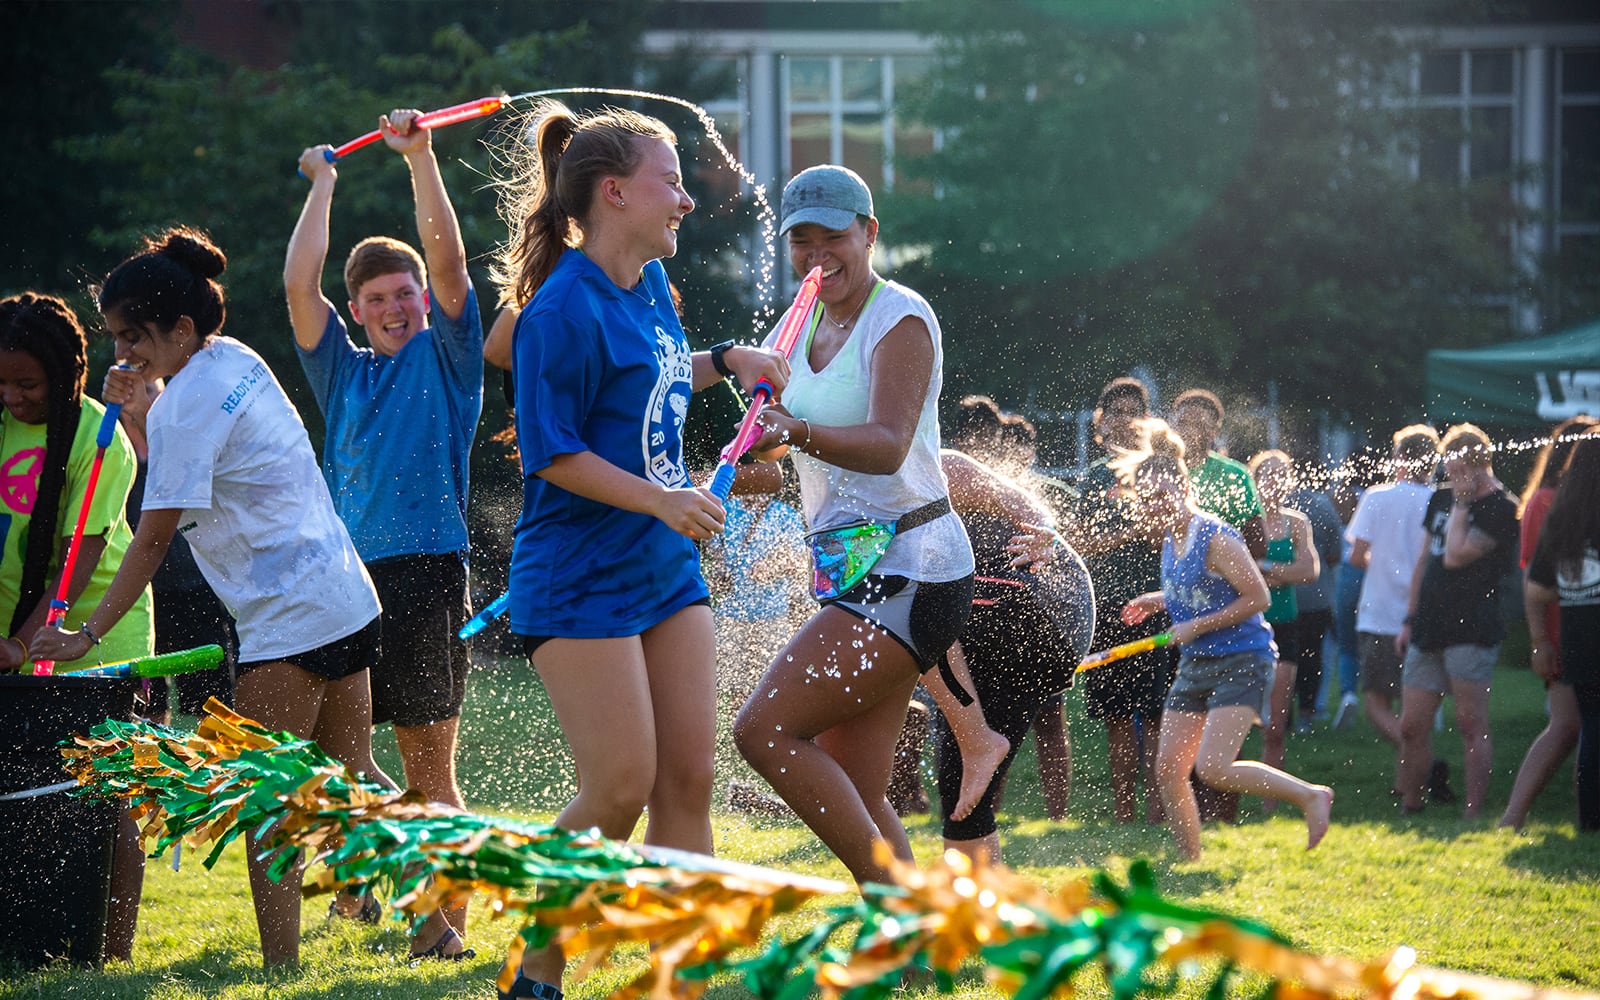 Students having water fight on campus green.